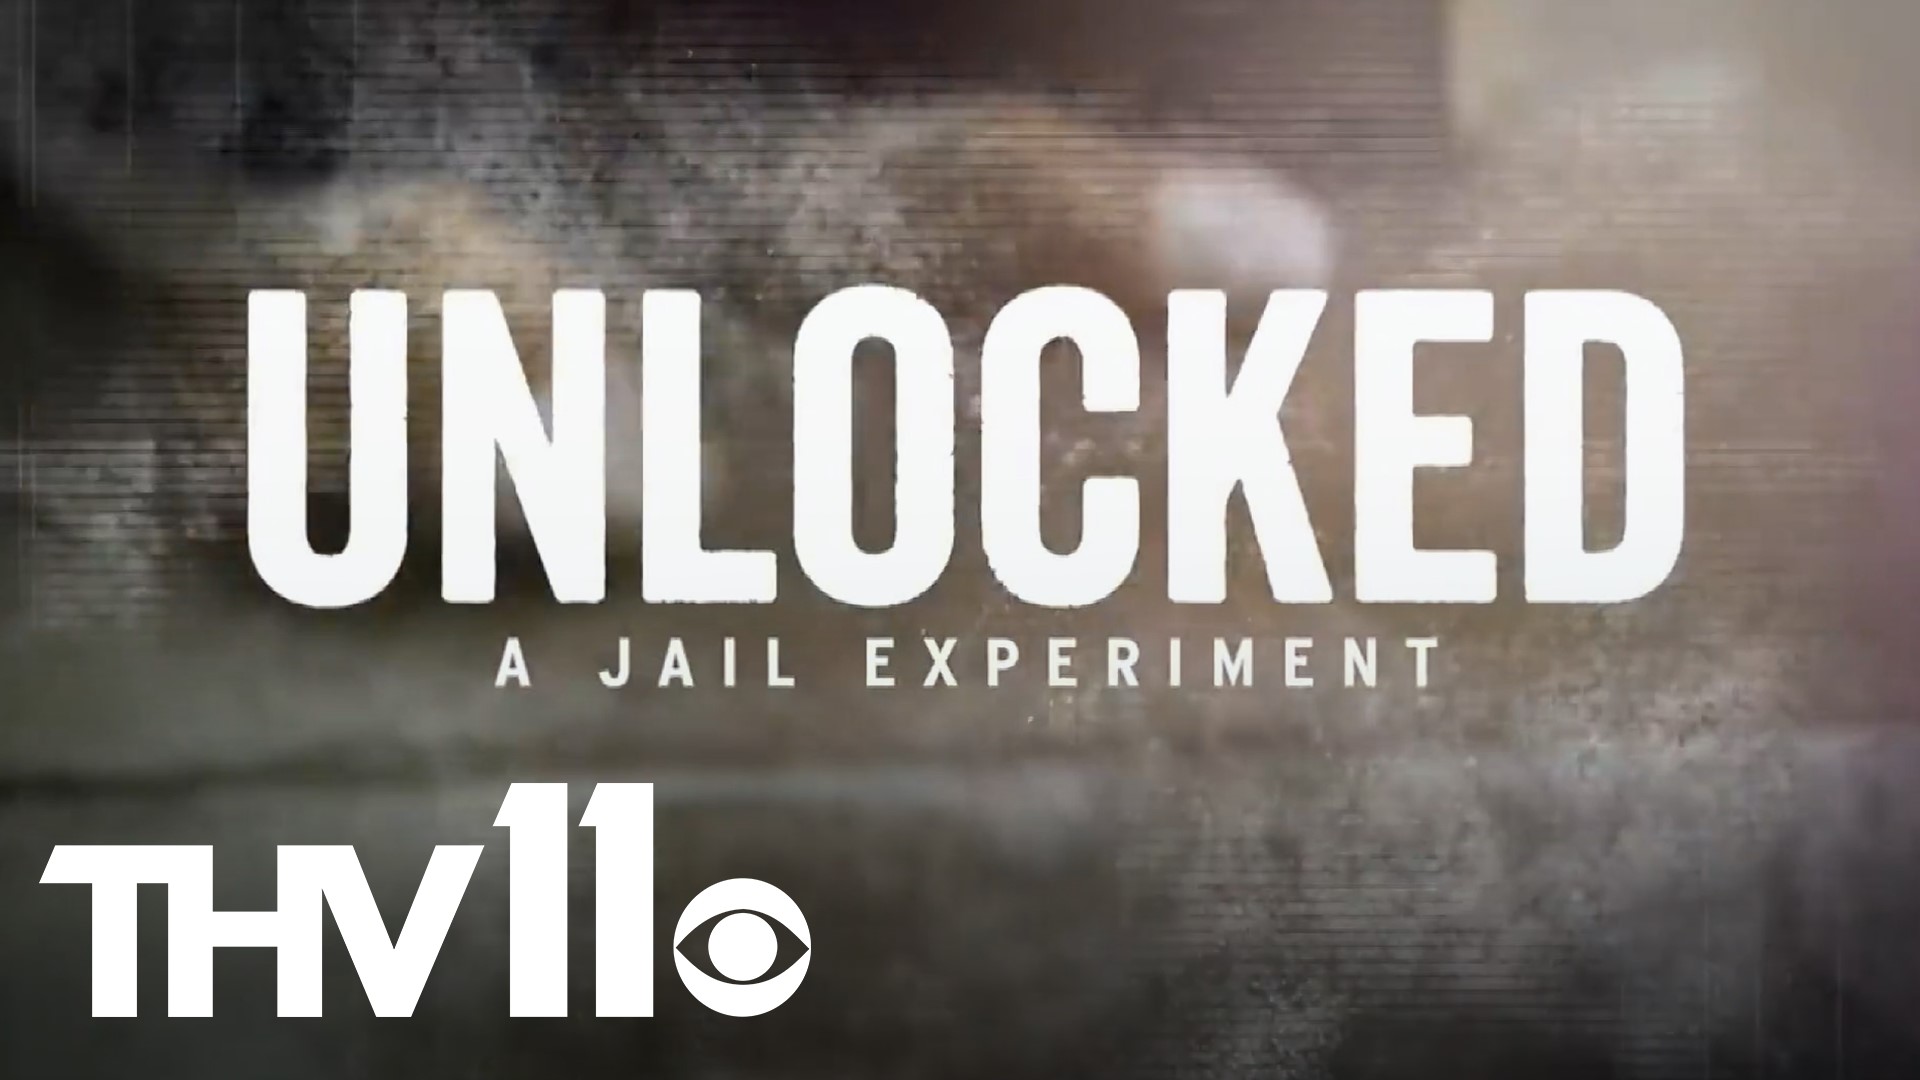 Pulaski County officials have decided to return the $60,000 earned for filming the Netflix docuseries Unlocked: A Jail Experiment. Here’s why.